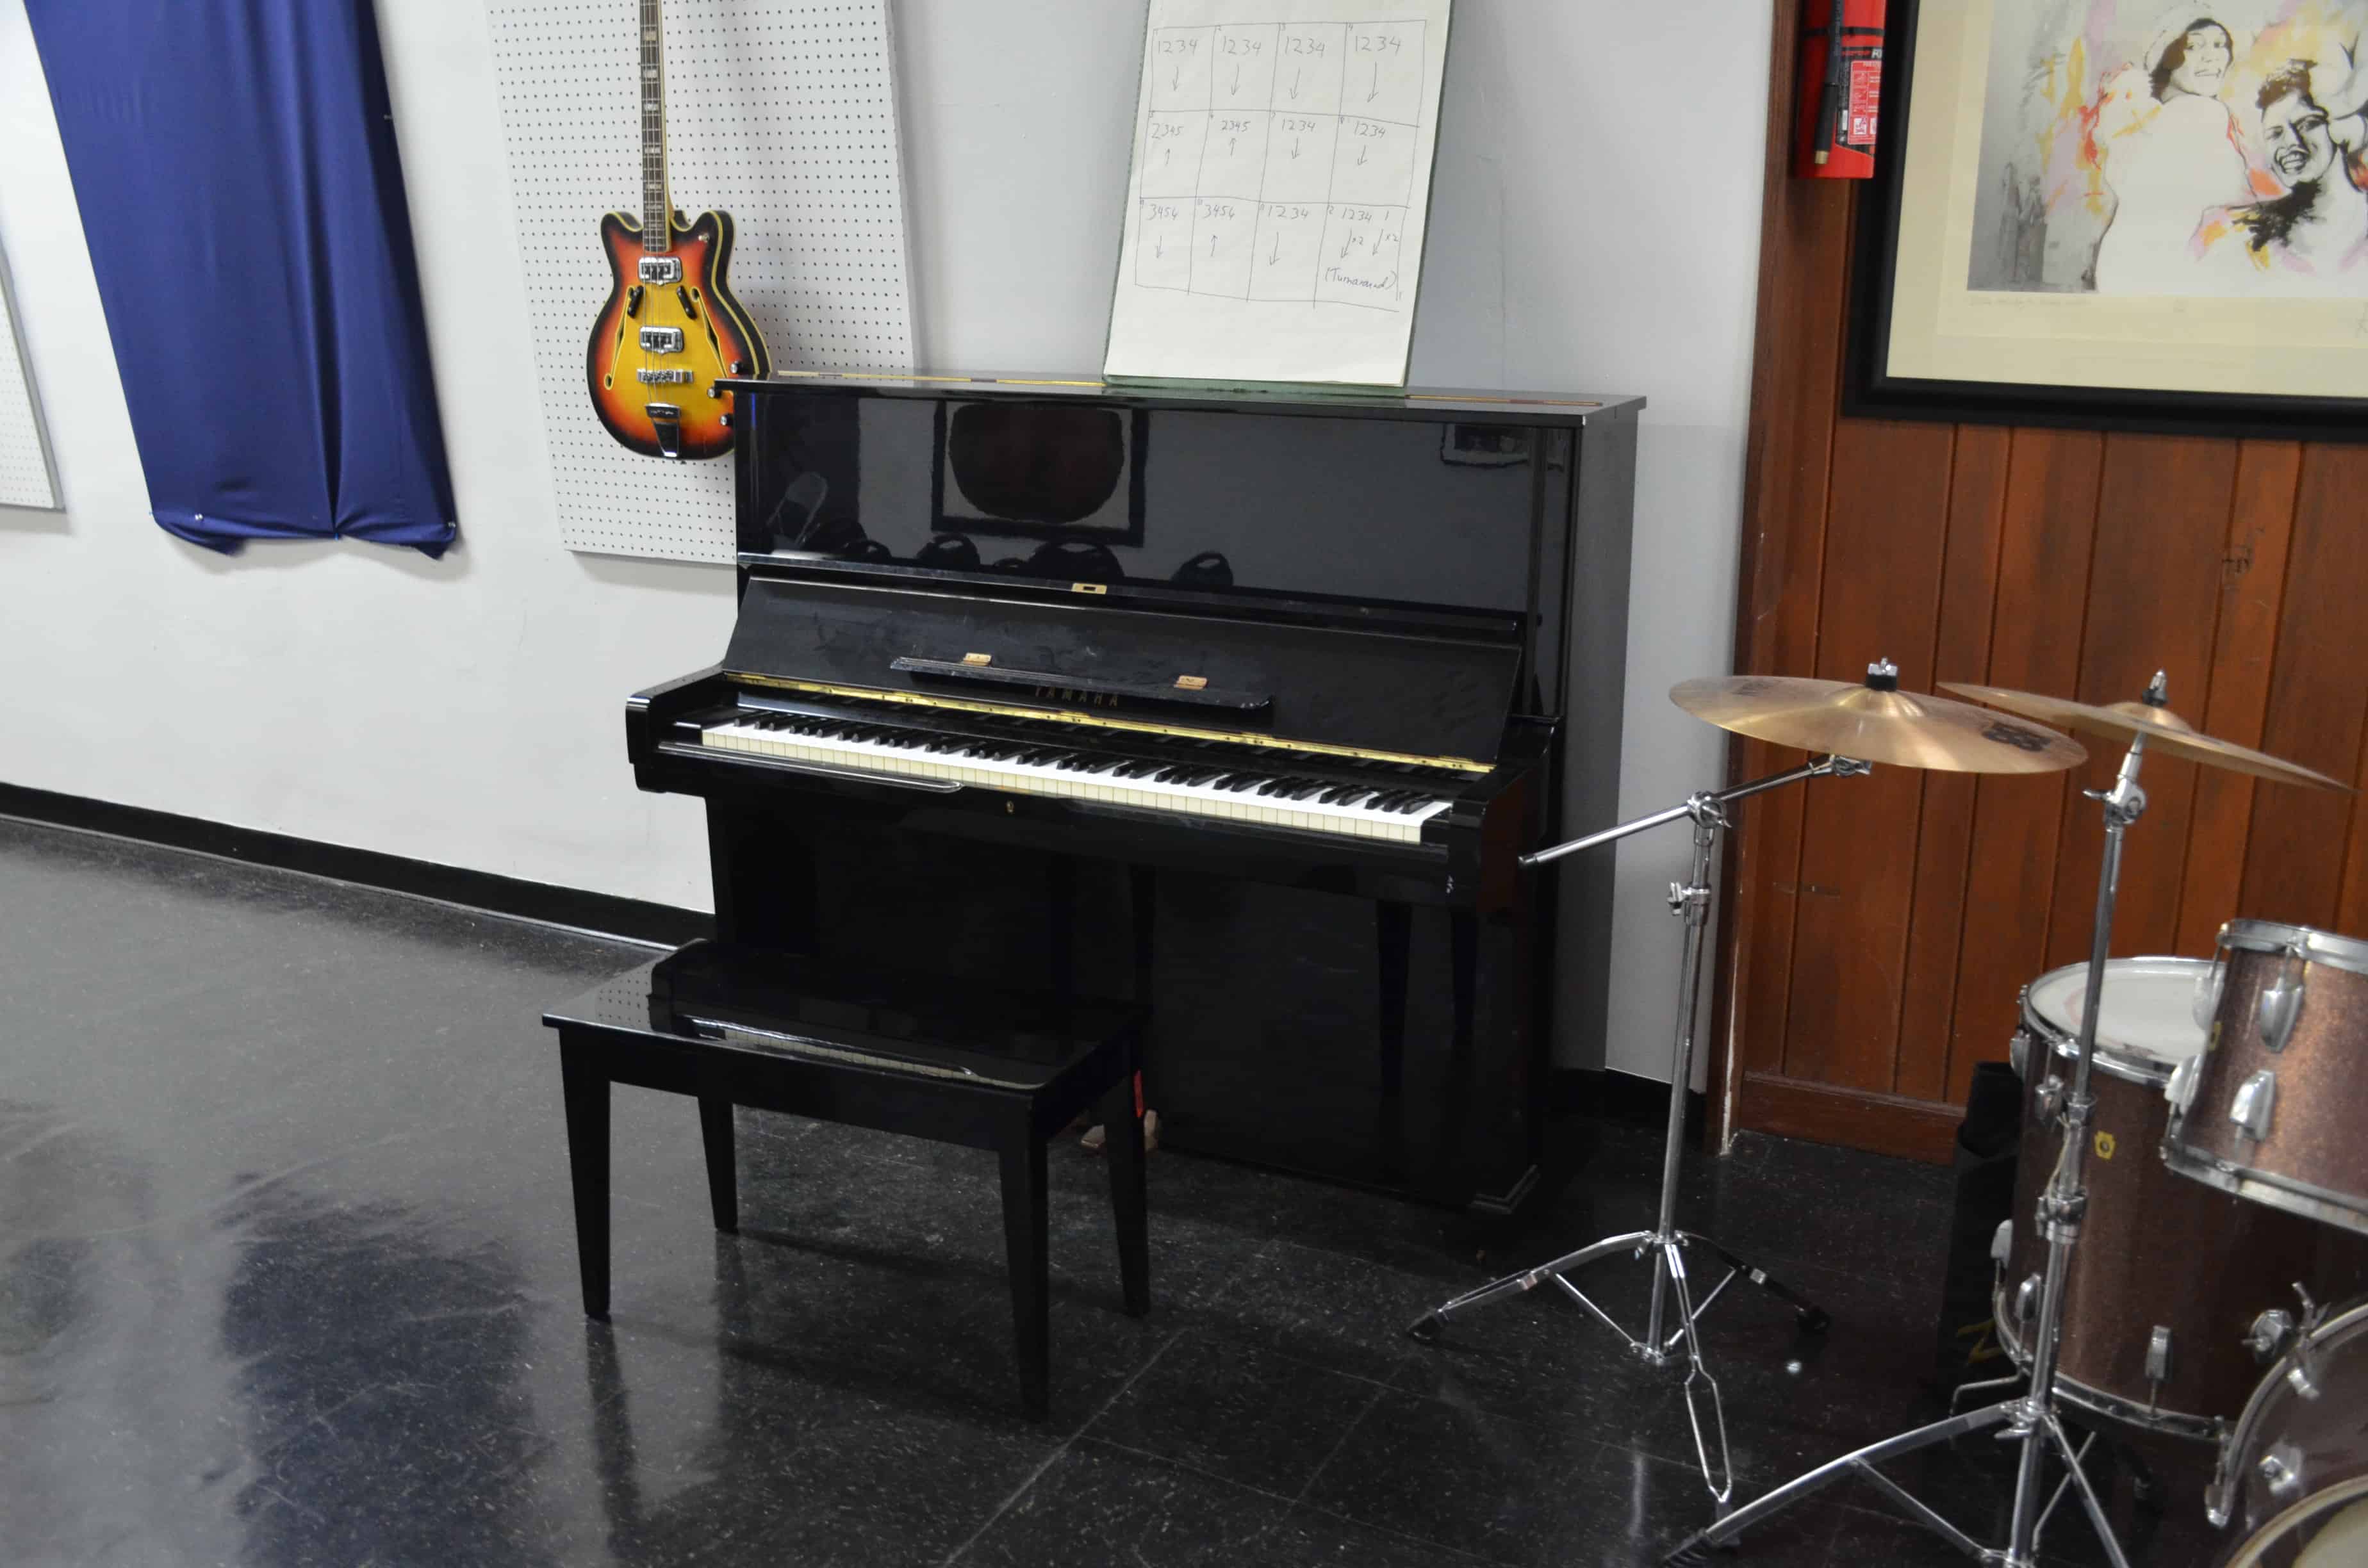 Piano played by Willie Dixon at Chess Records building (Willie Dixon's Blues Heaven) in Chicago, Illinois